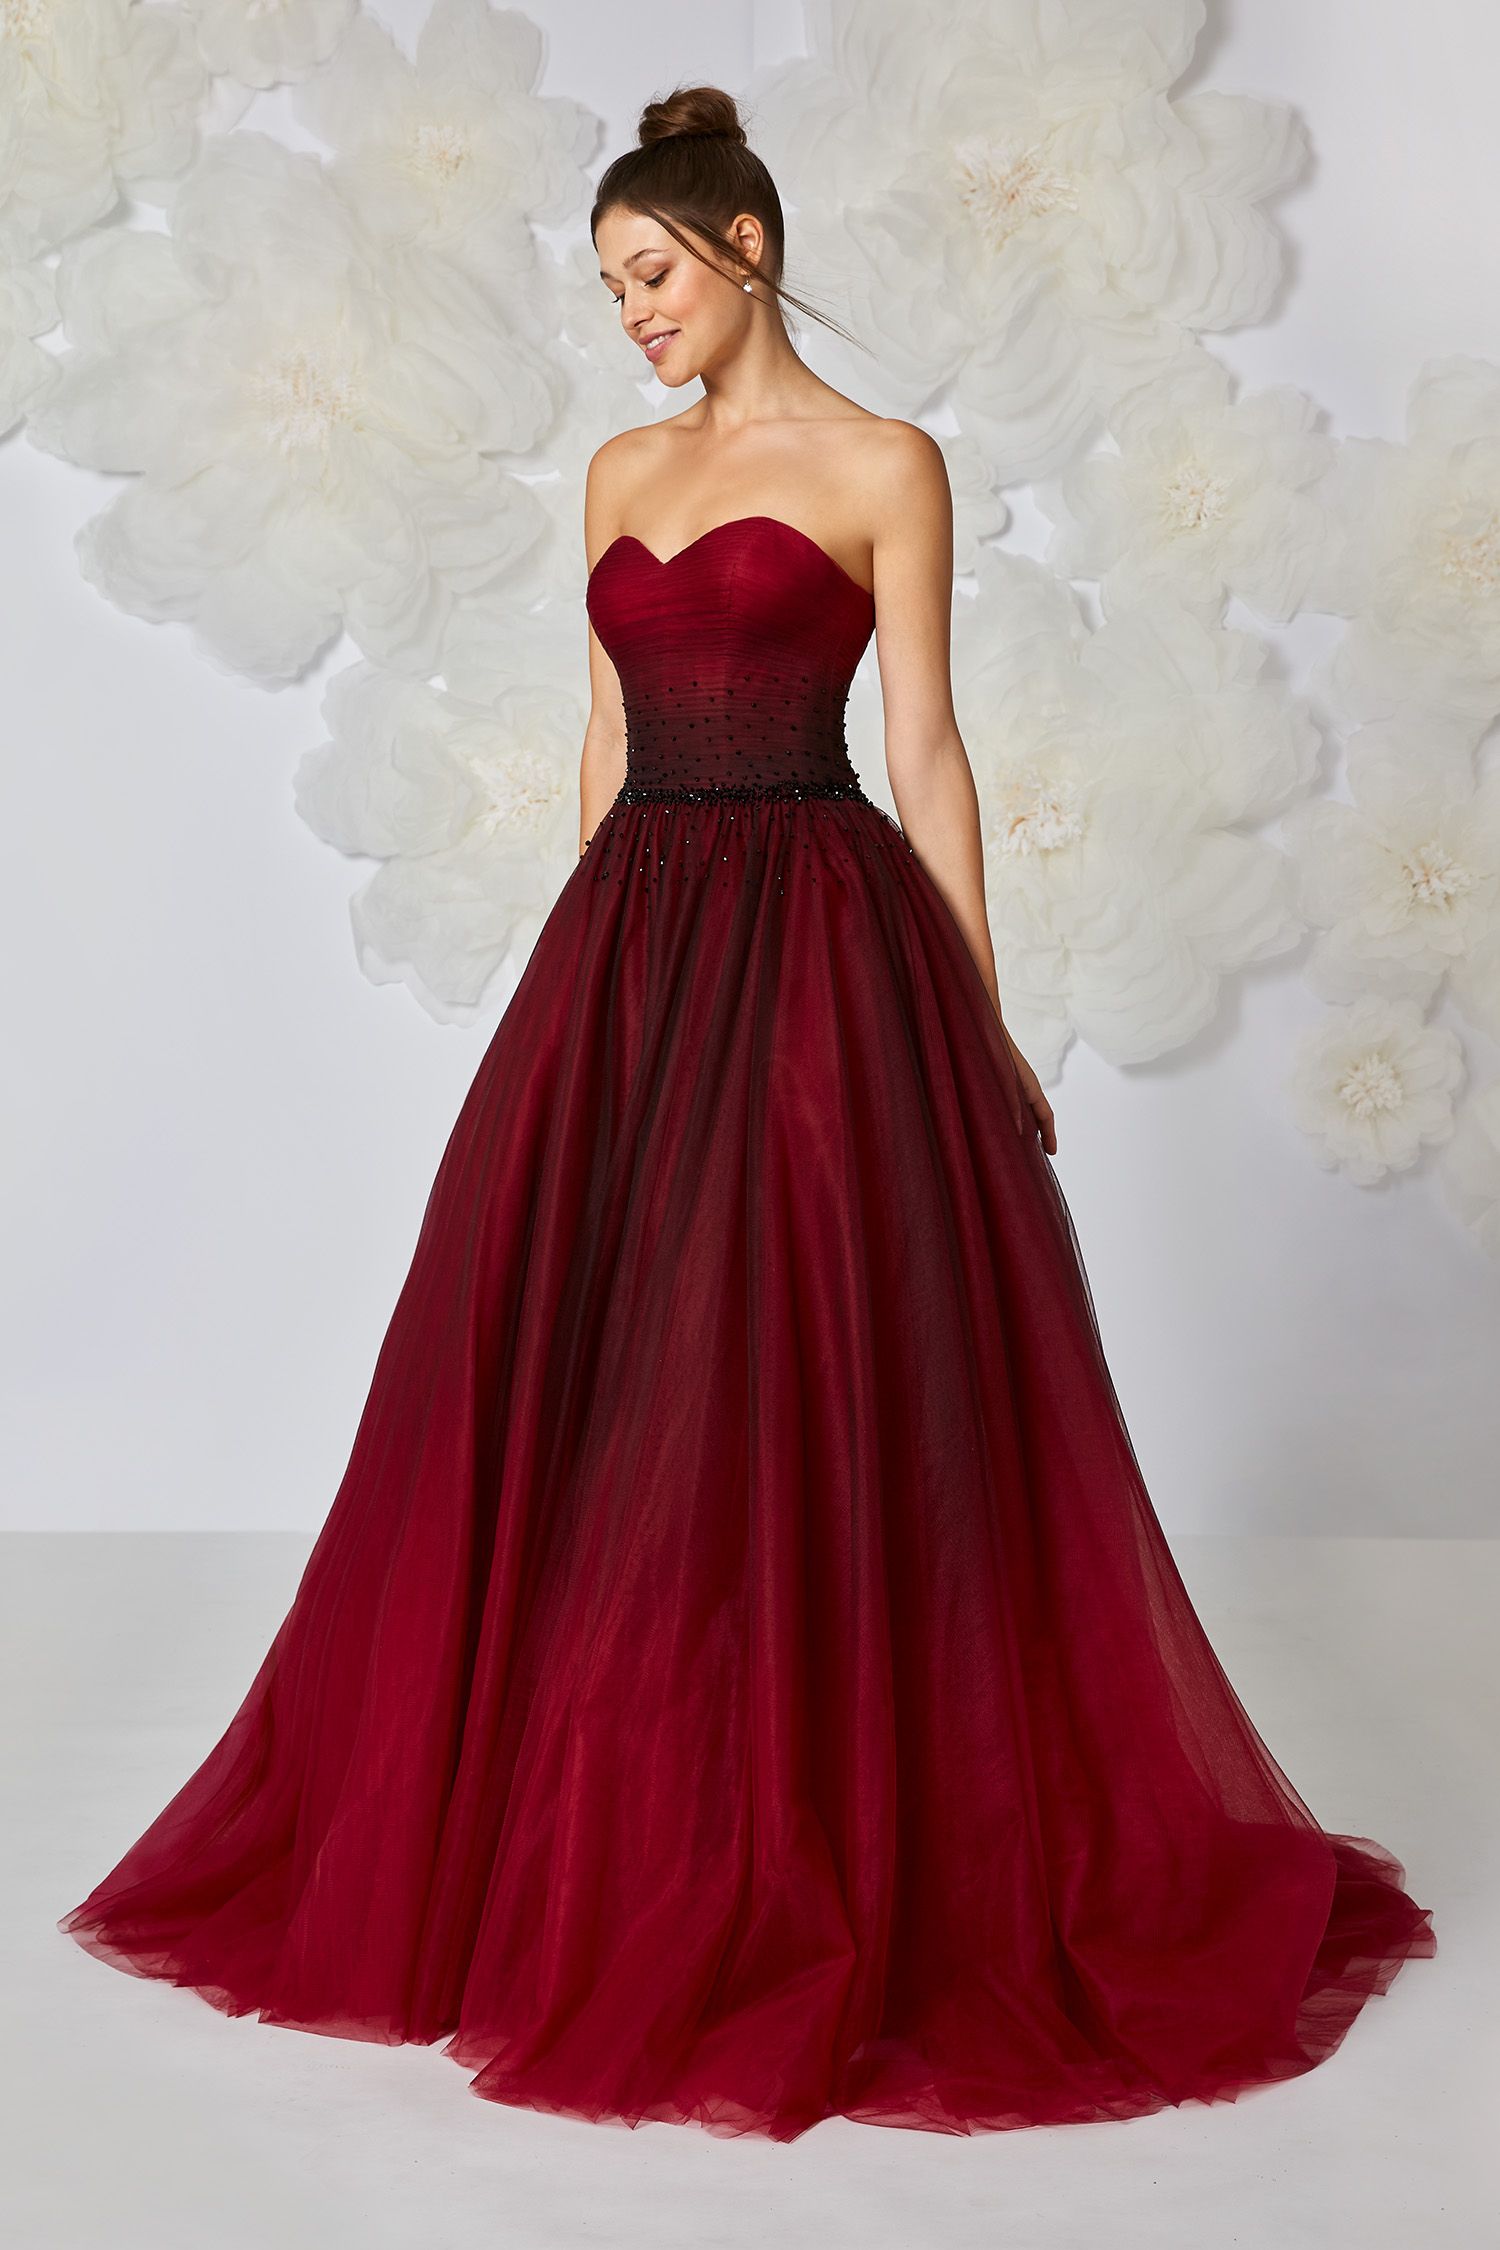 Bridal outfit in red for that special day 5